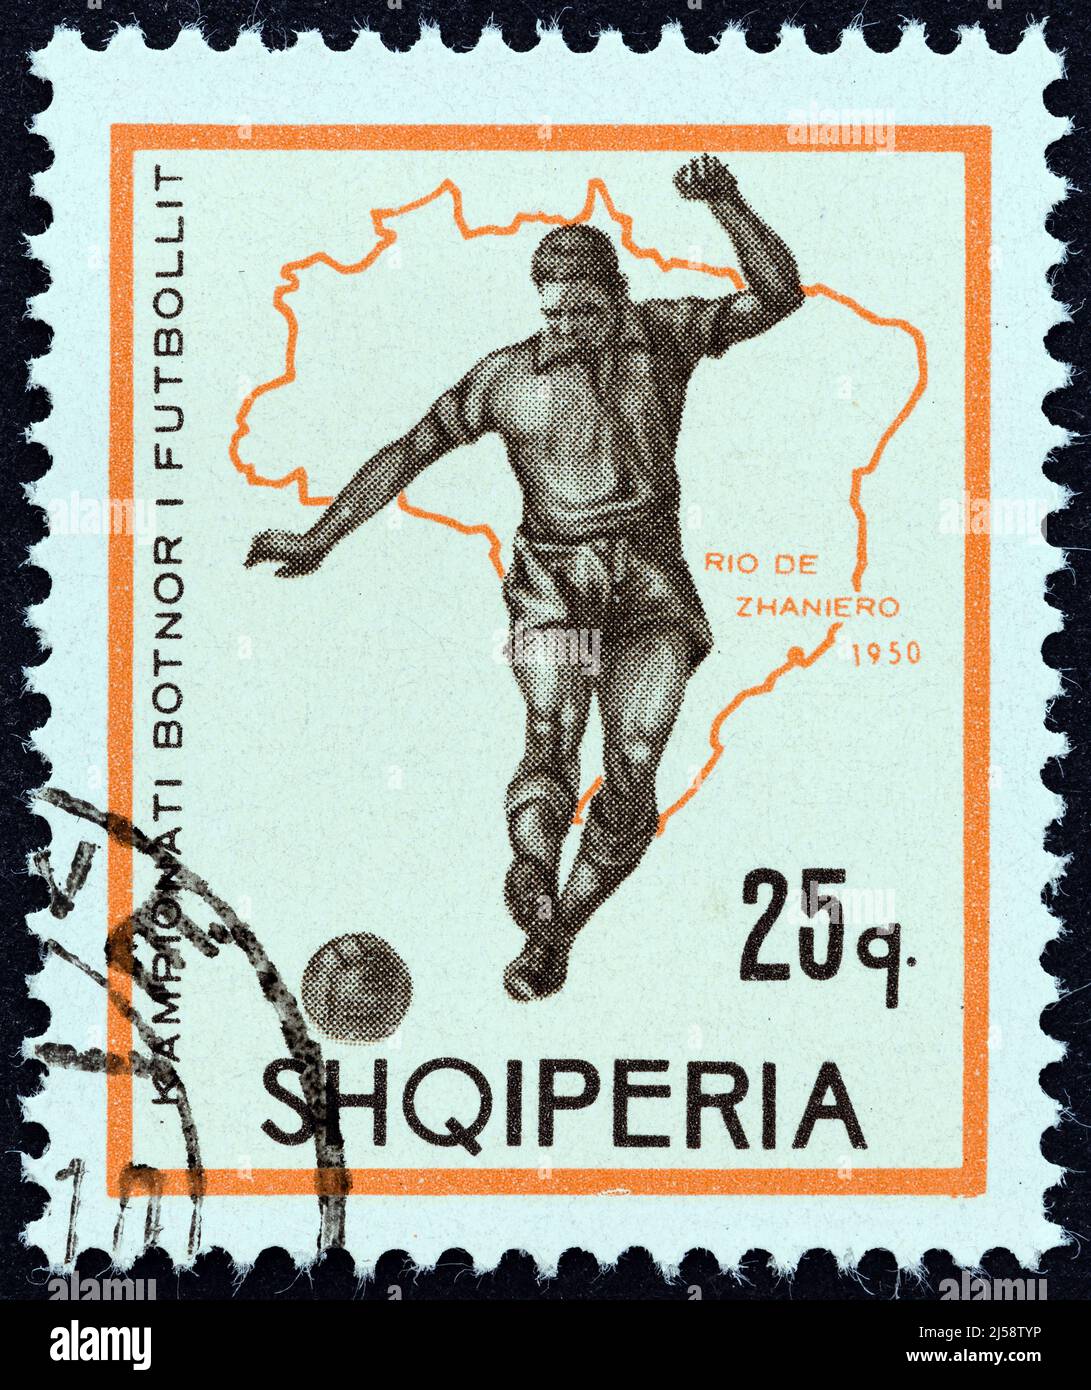 ALBANIA - CIRCA 1966: A stamp printed in Albania from the 'Football World Cup - England' issue shows soccer player and map of Brazil (1950). Stock Photo